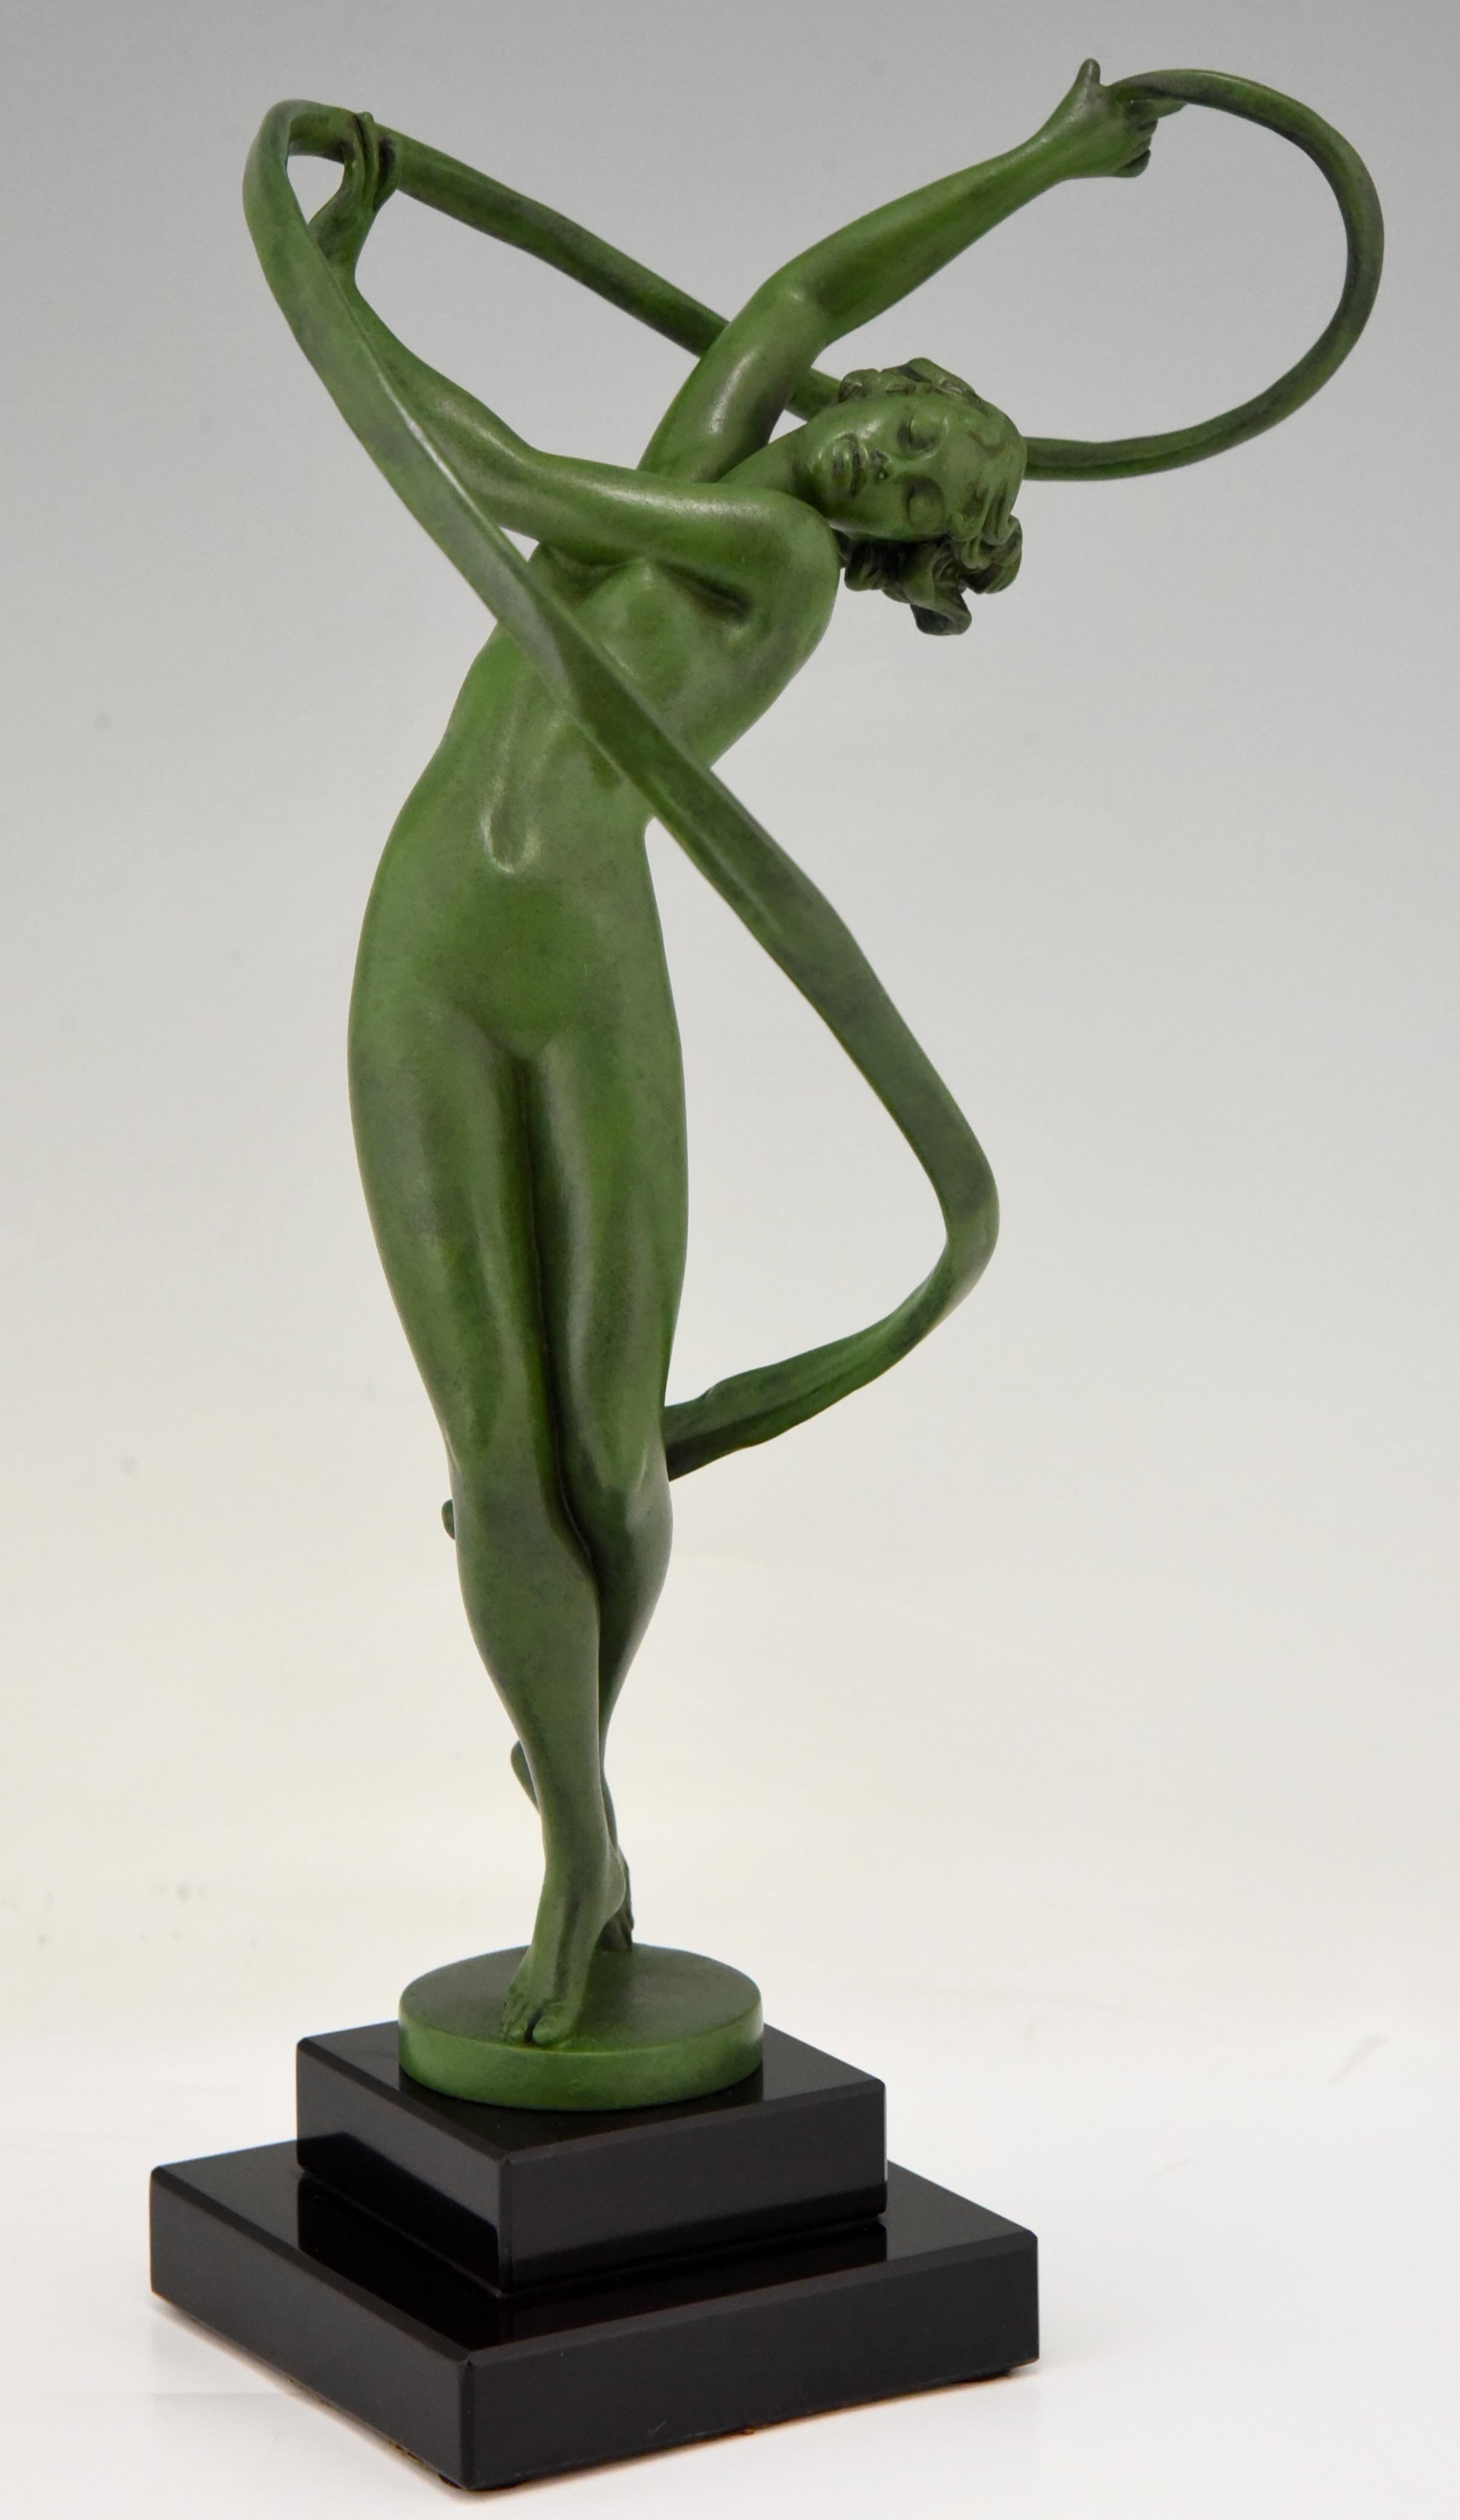 Tourbillon, elegant Art Deco sculpture of a nude dancer with swirling ribbon by Fayral, pseudonym of Pierre Le Faguays.
Cast at the Max Le Verrier foundry in Paris, circa 1930.
The art metal sculpture has a green patina and stands on a Belgian